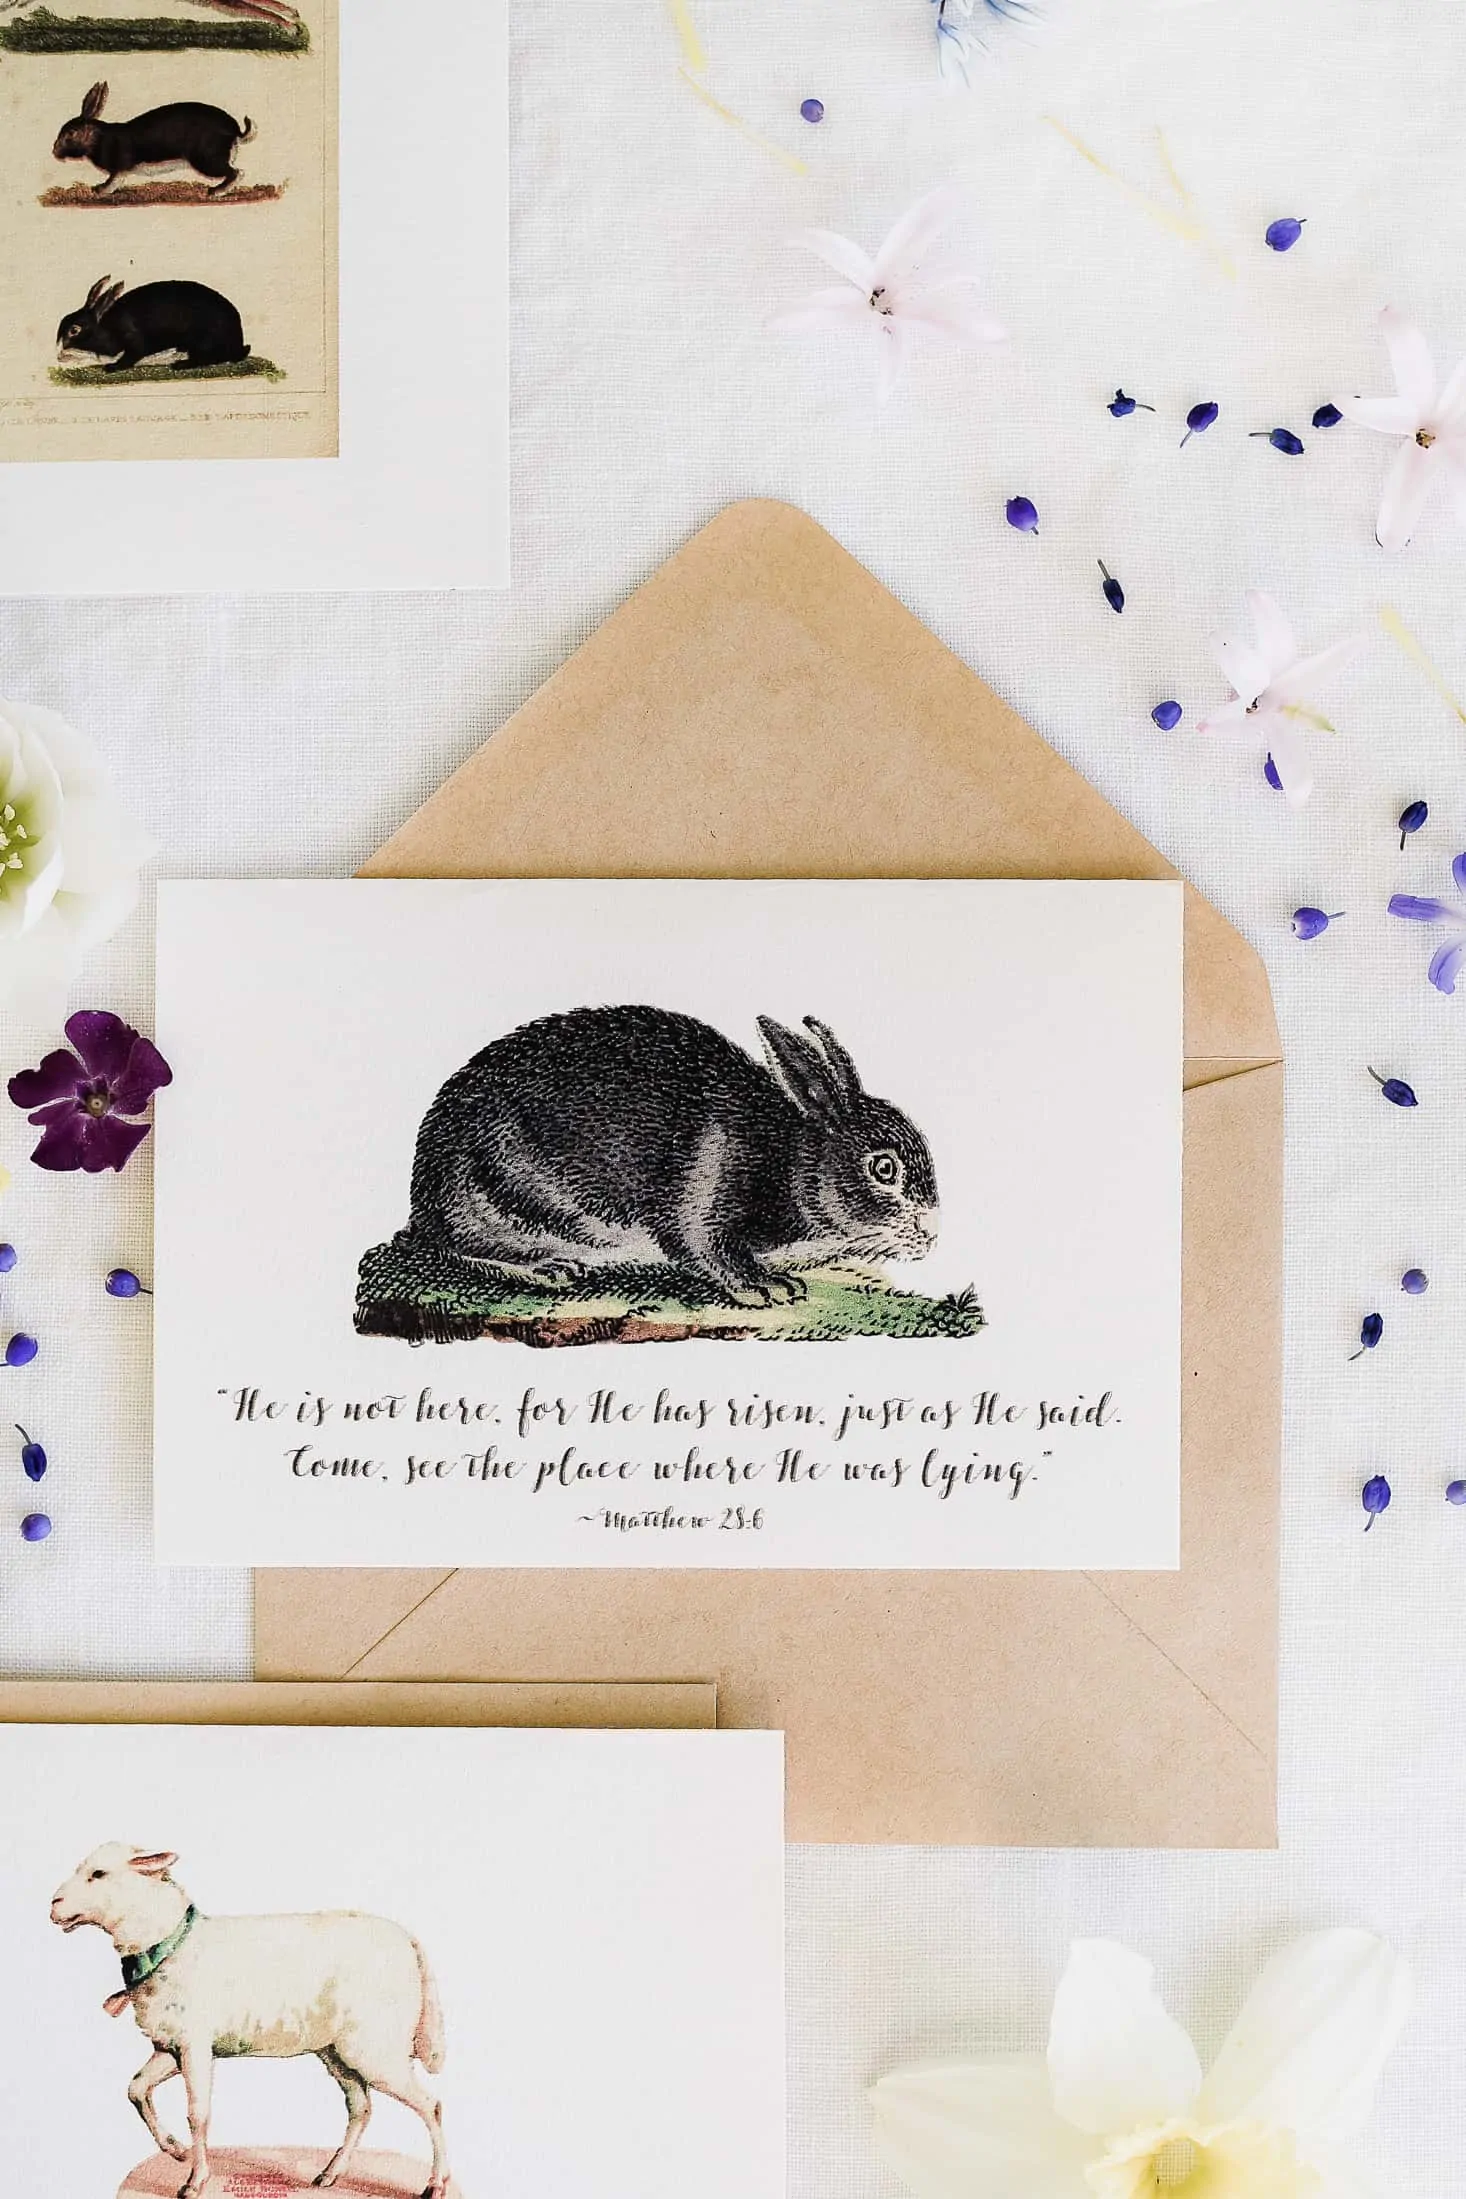 printable easter cards with rabbits, sheep, and quotes